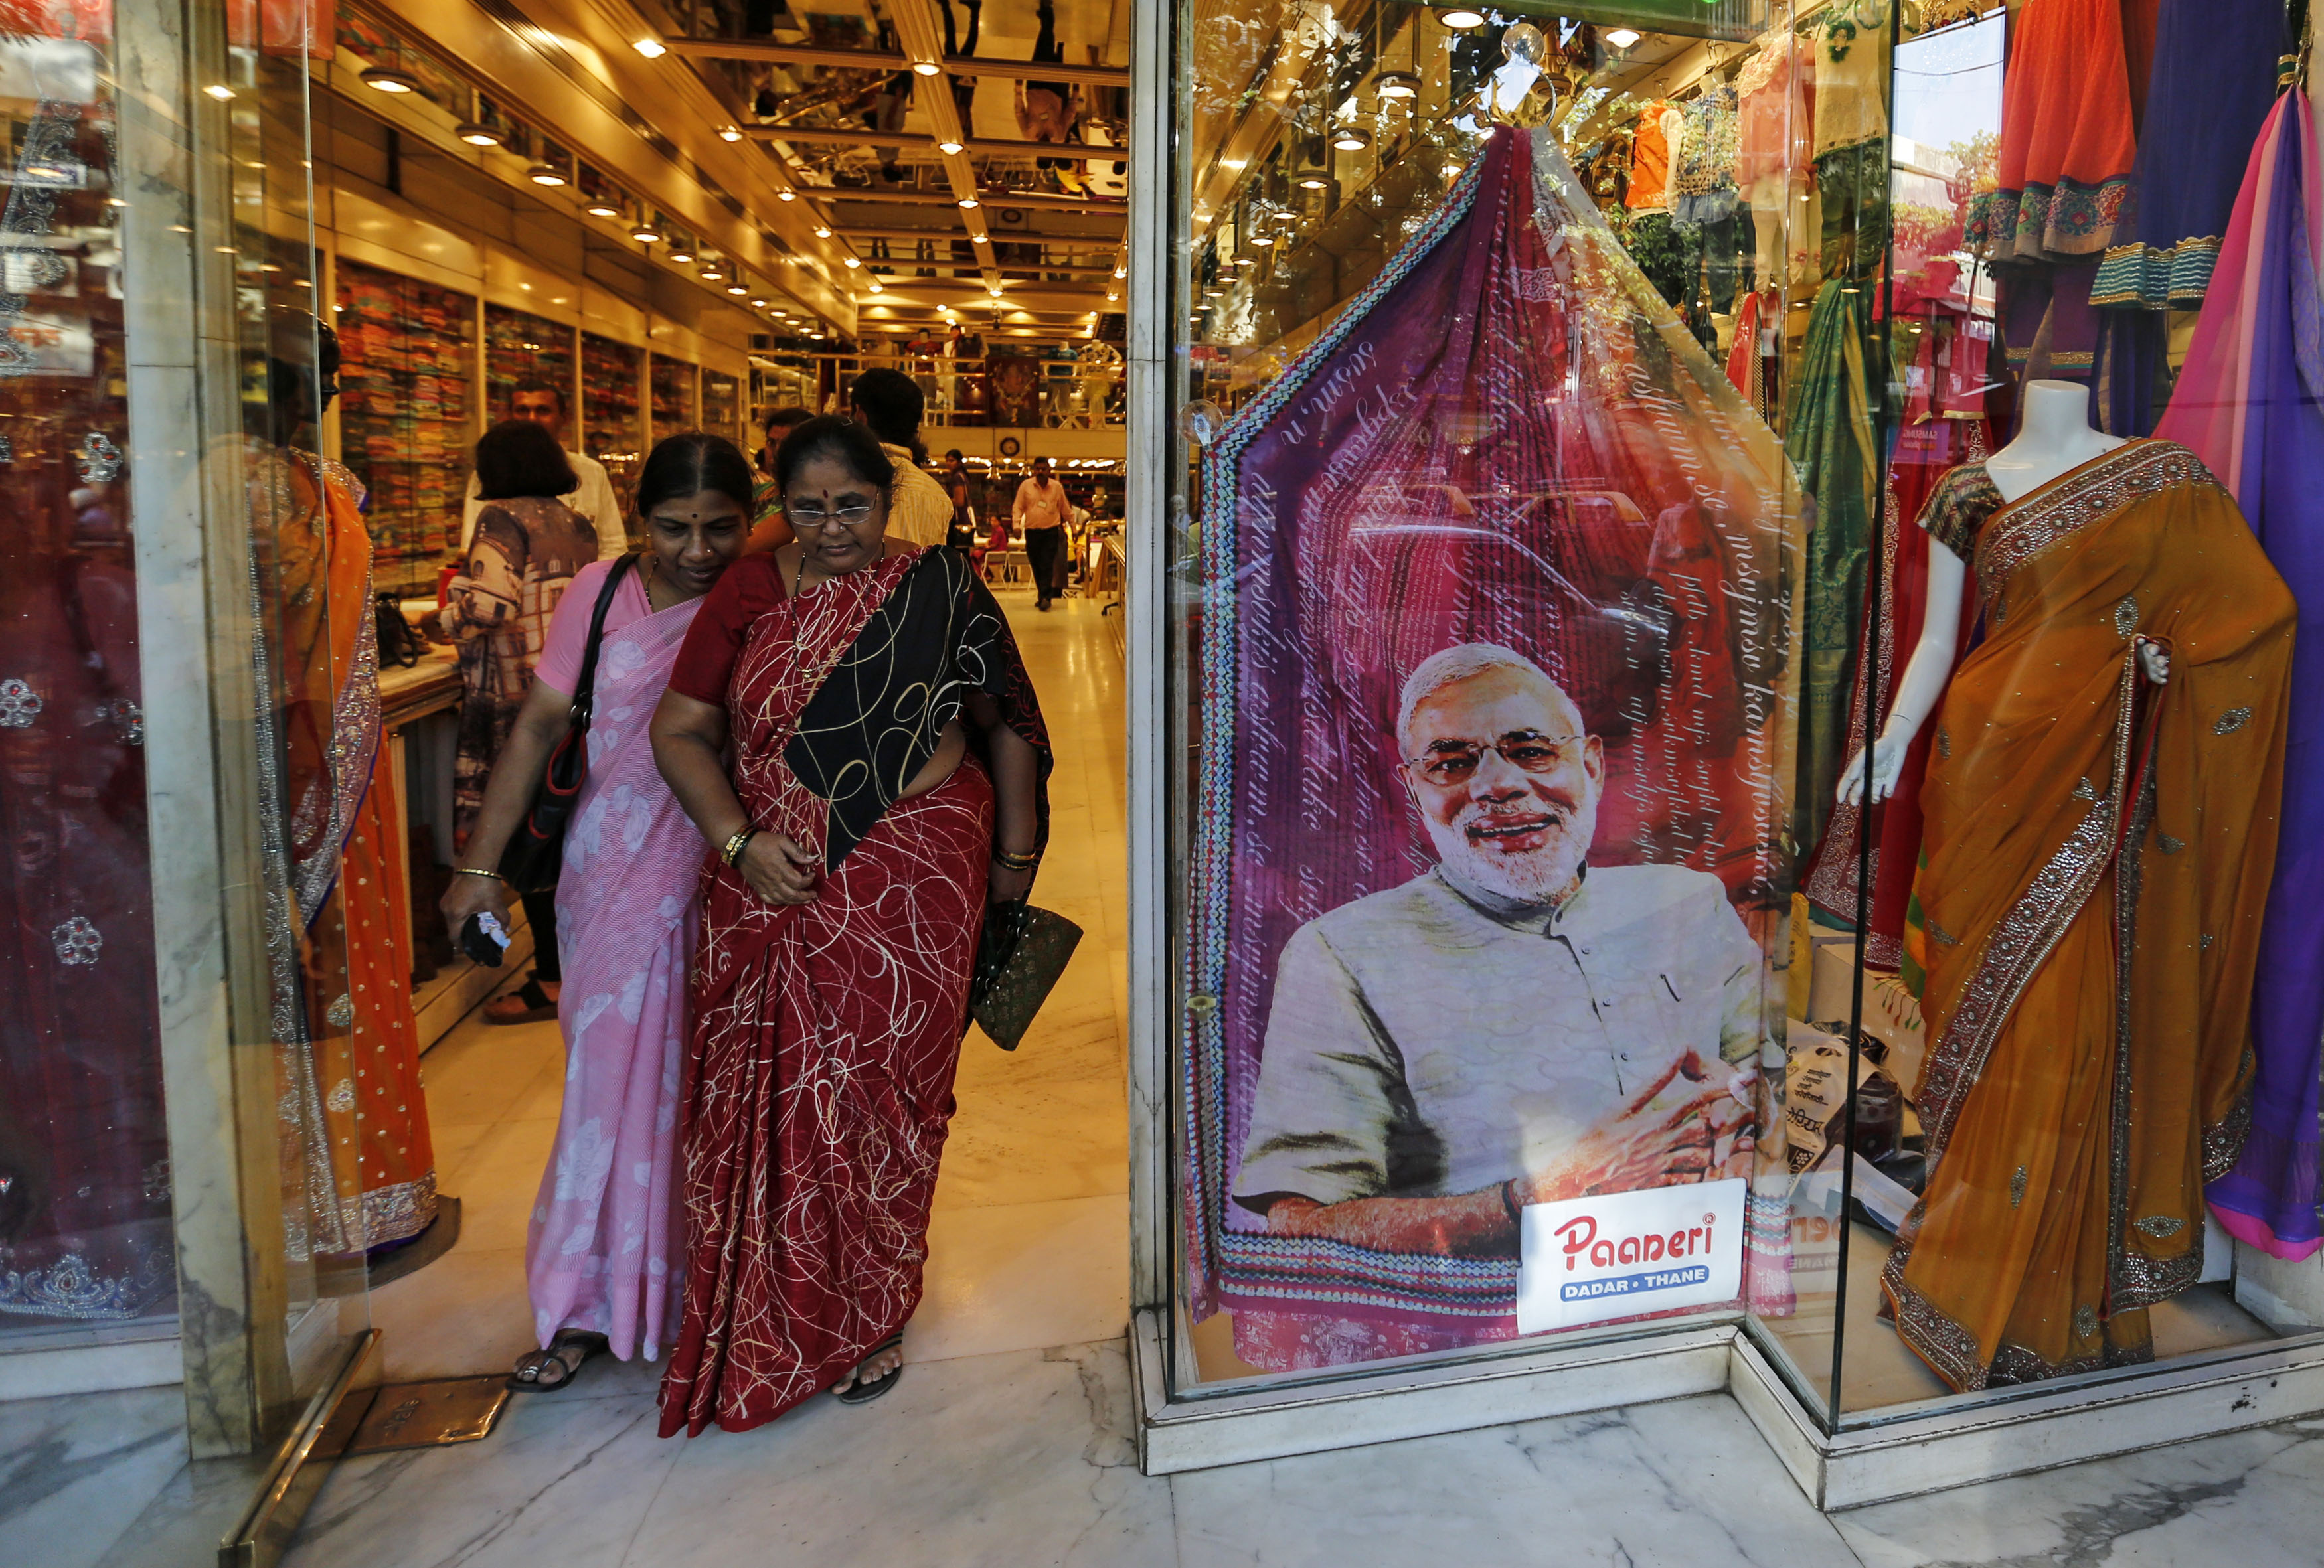 Customers walk past a sari, a traditional women's garment, printed with a portrait of Hindu nationalist Narendra Modi, the newly elected Prime Minister of India. (Danish Siddiqui — Reuters)